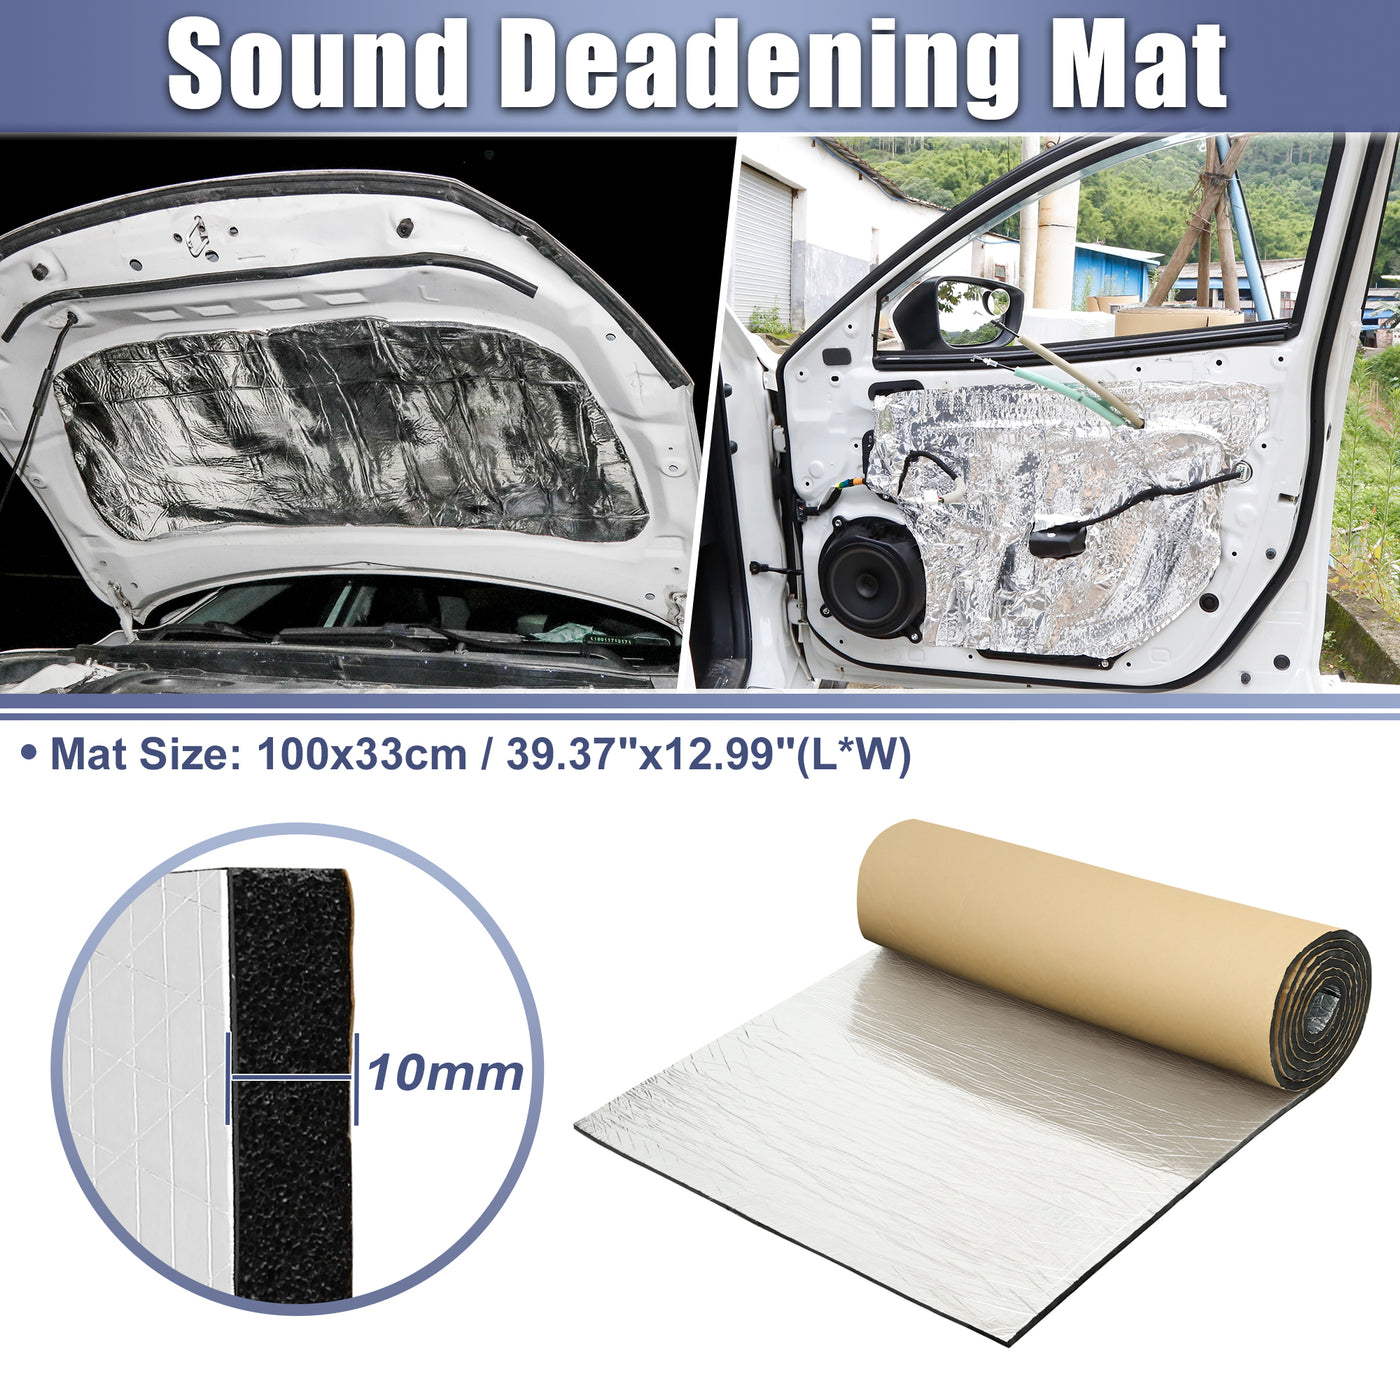 X AUTOHAUX 394mil 10mm 3.55sqft Car Sound Deadening Mat Aluminum Foil Closed Cell Foam Heat Shield Material Damping Self Adhesive Universal for Hood Fender and Boat Engine Cover 39.37"x12.99"